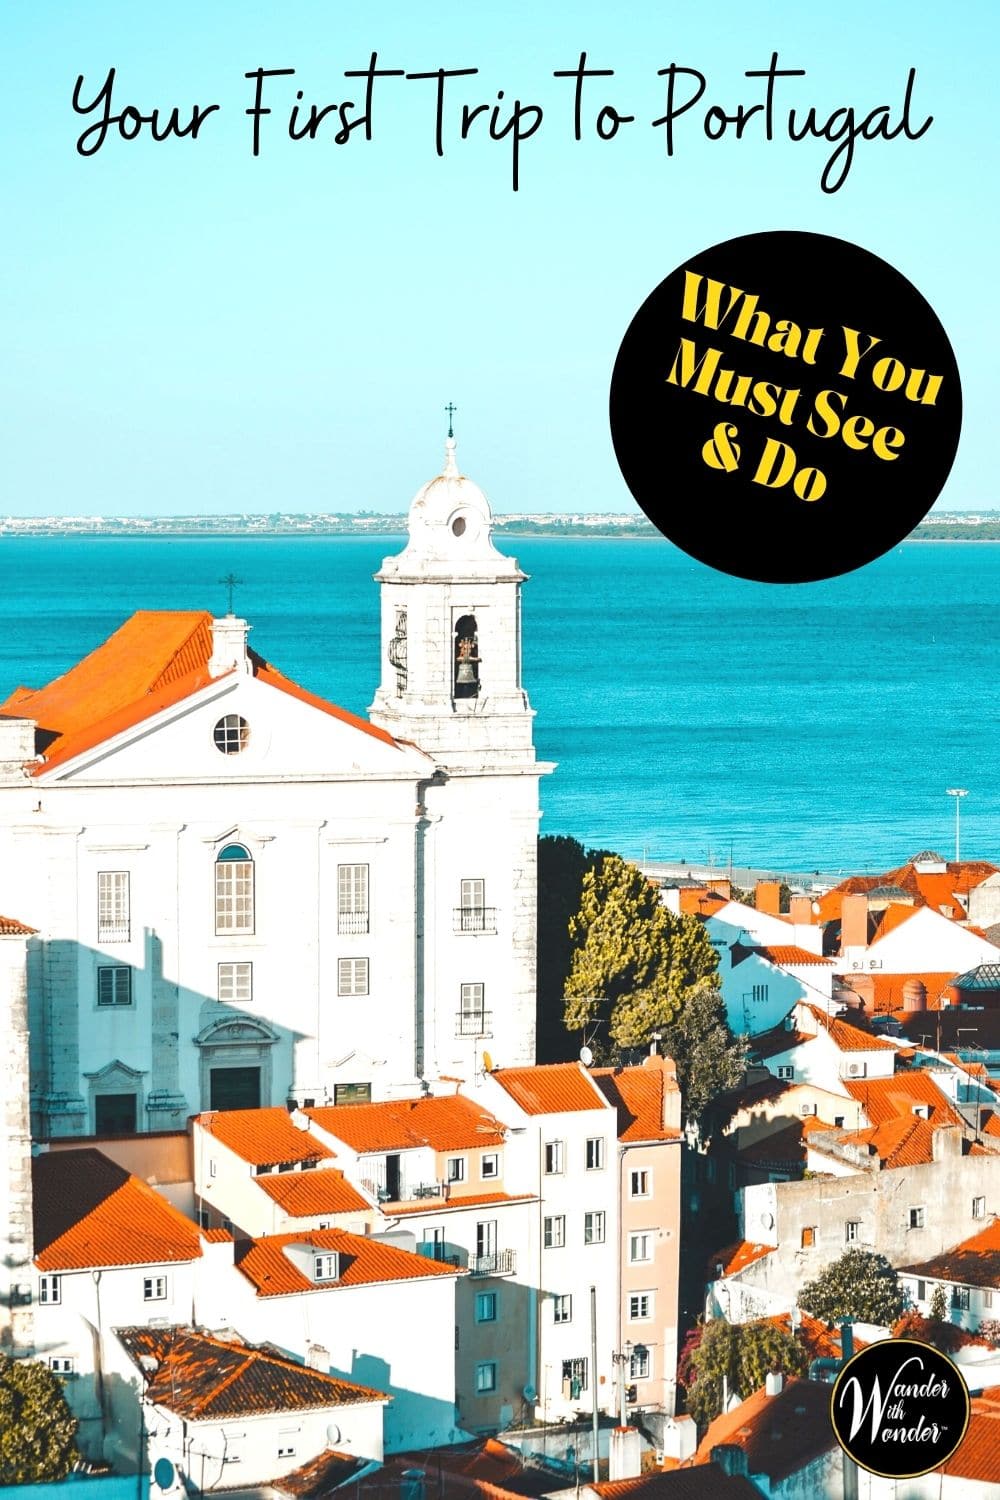 Portugal is a beautiful country with scenic beauty, history, good food, and great wine. Here are things to do on your first trip to Portugal.